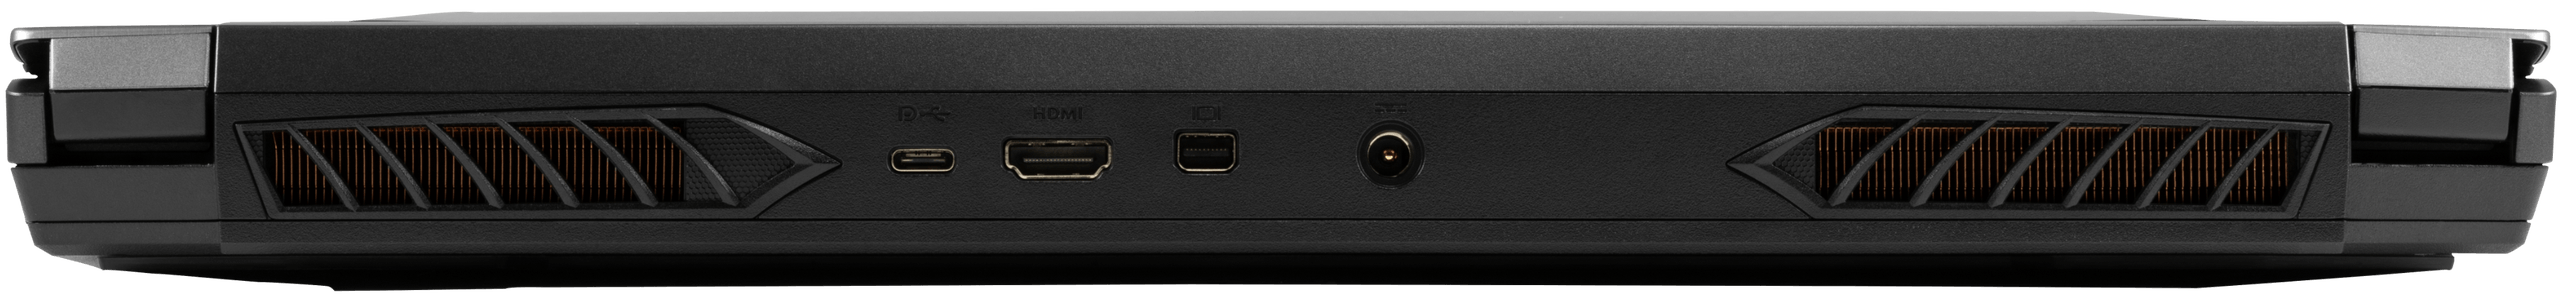 A rear view of the Serval WS laptop’s ports, including USB-C, HDMI, mini DisplayPort, and charging port.